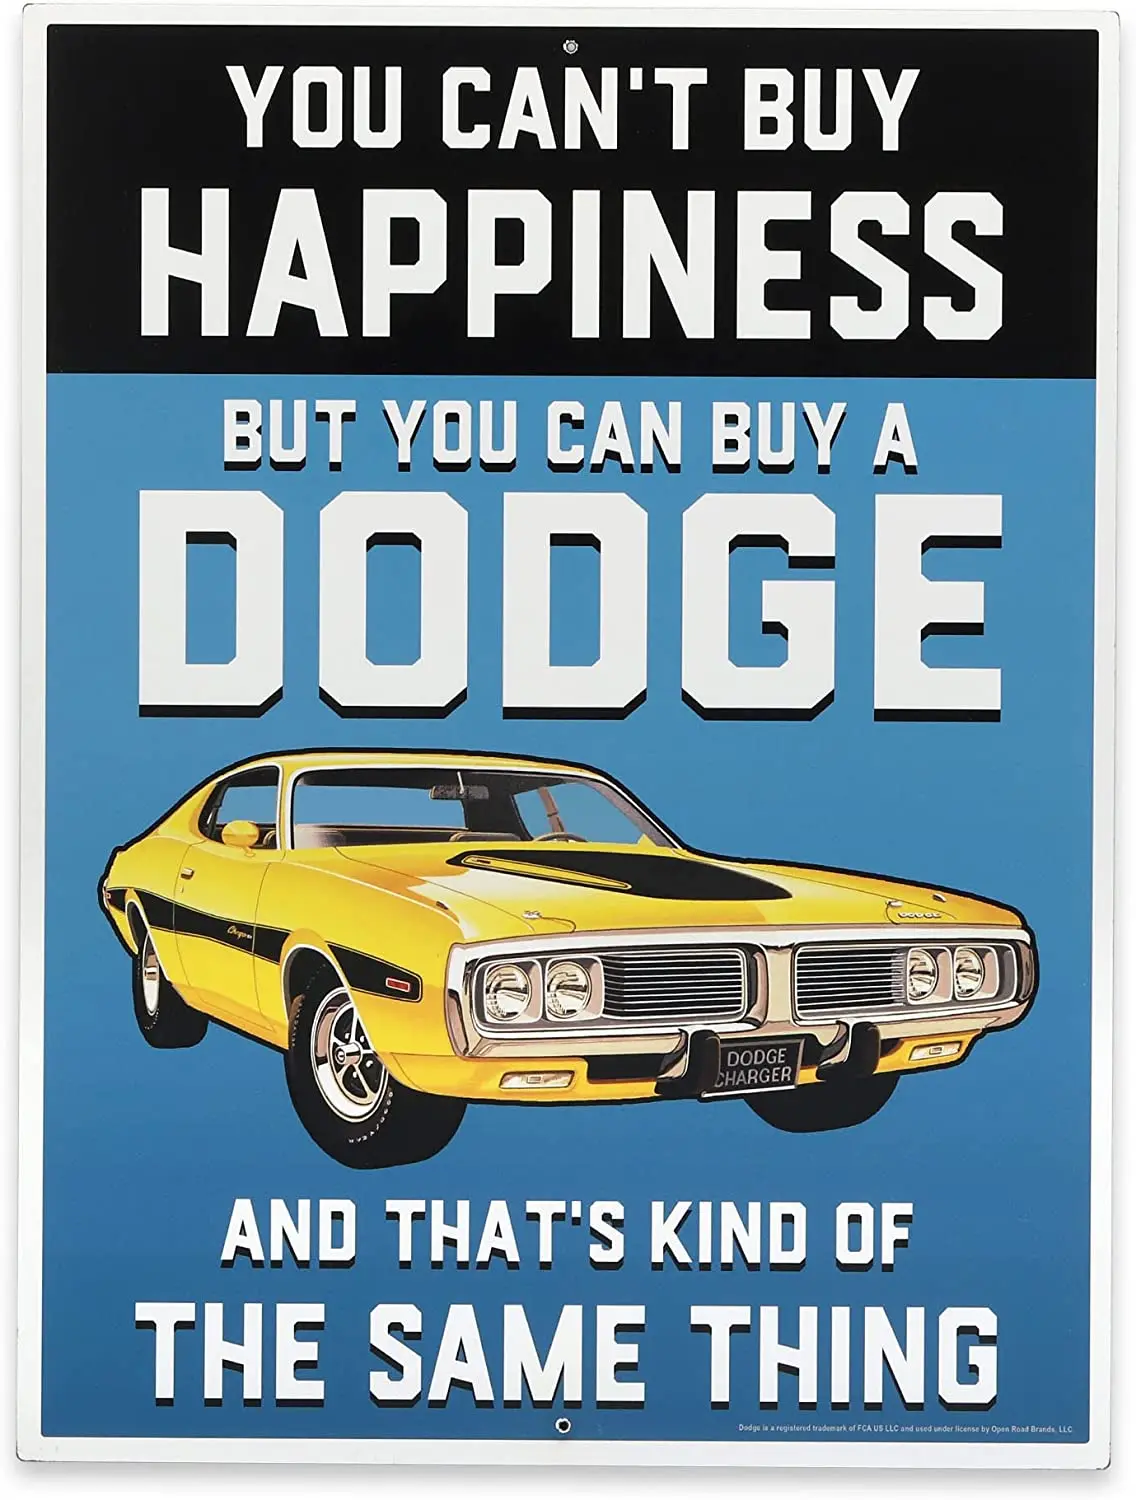 

Dodge Metal Sign - Can't Buy Happiness But You Can Buy a Dodge - Funny Dodge Sign for Garage, Shop or Man Cave